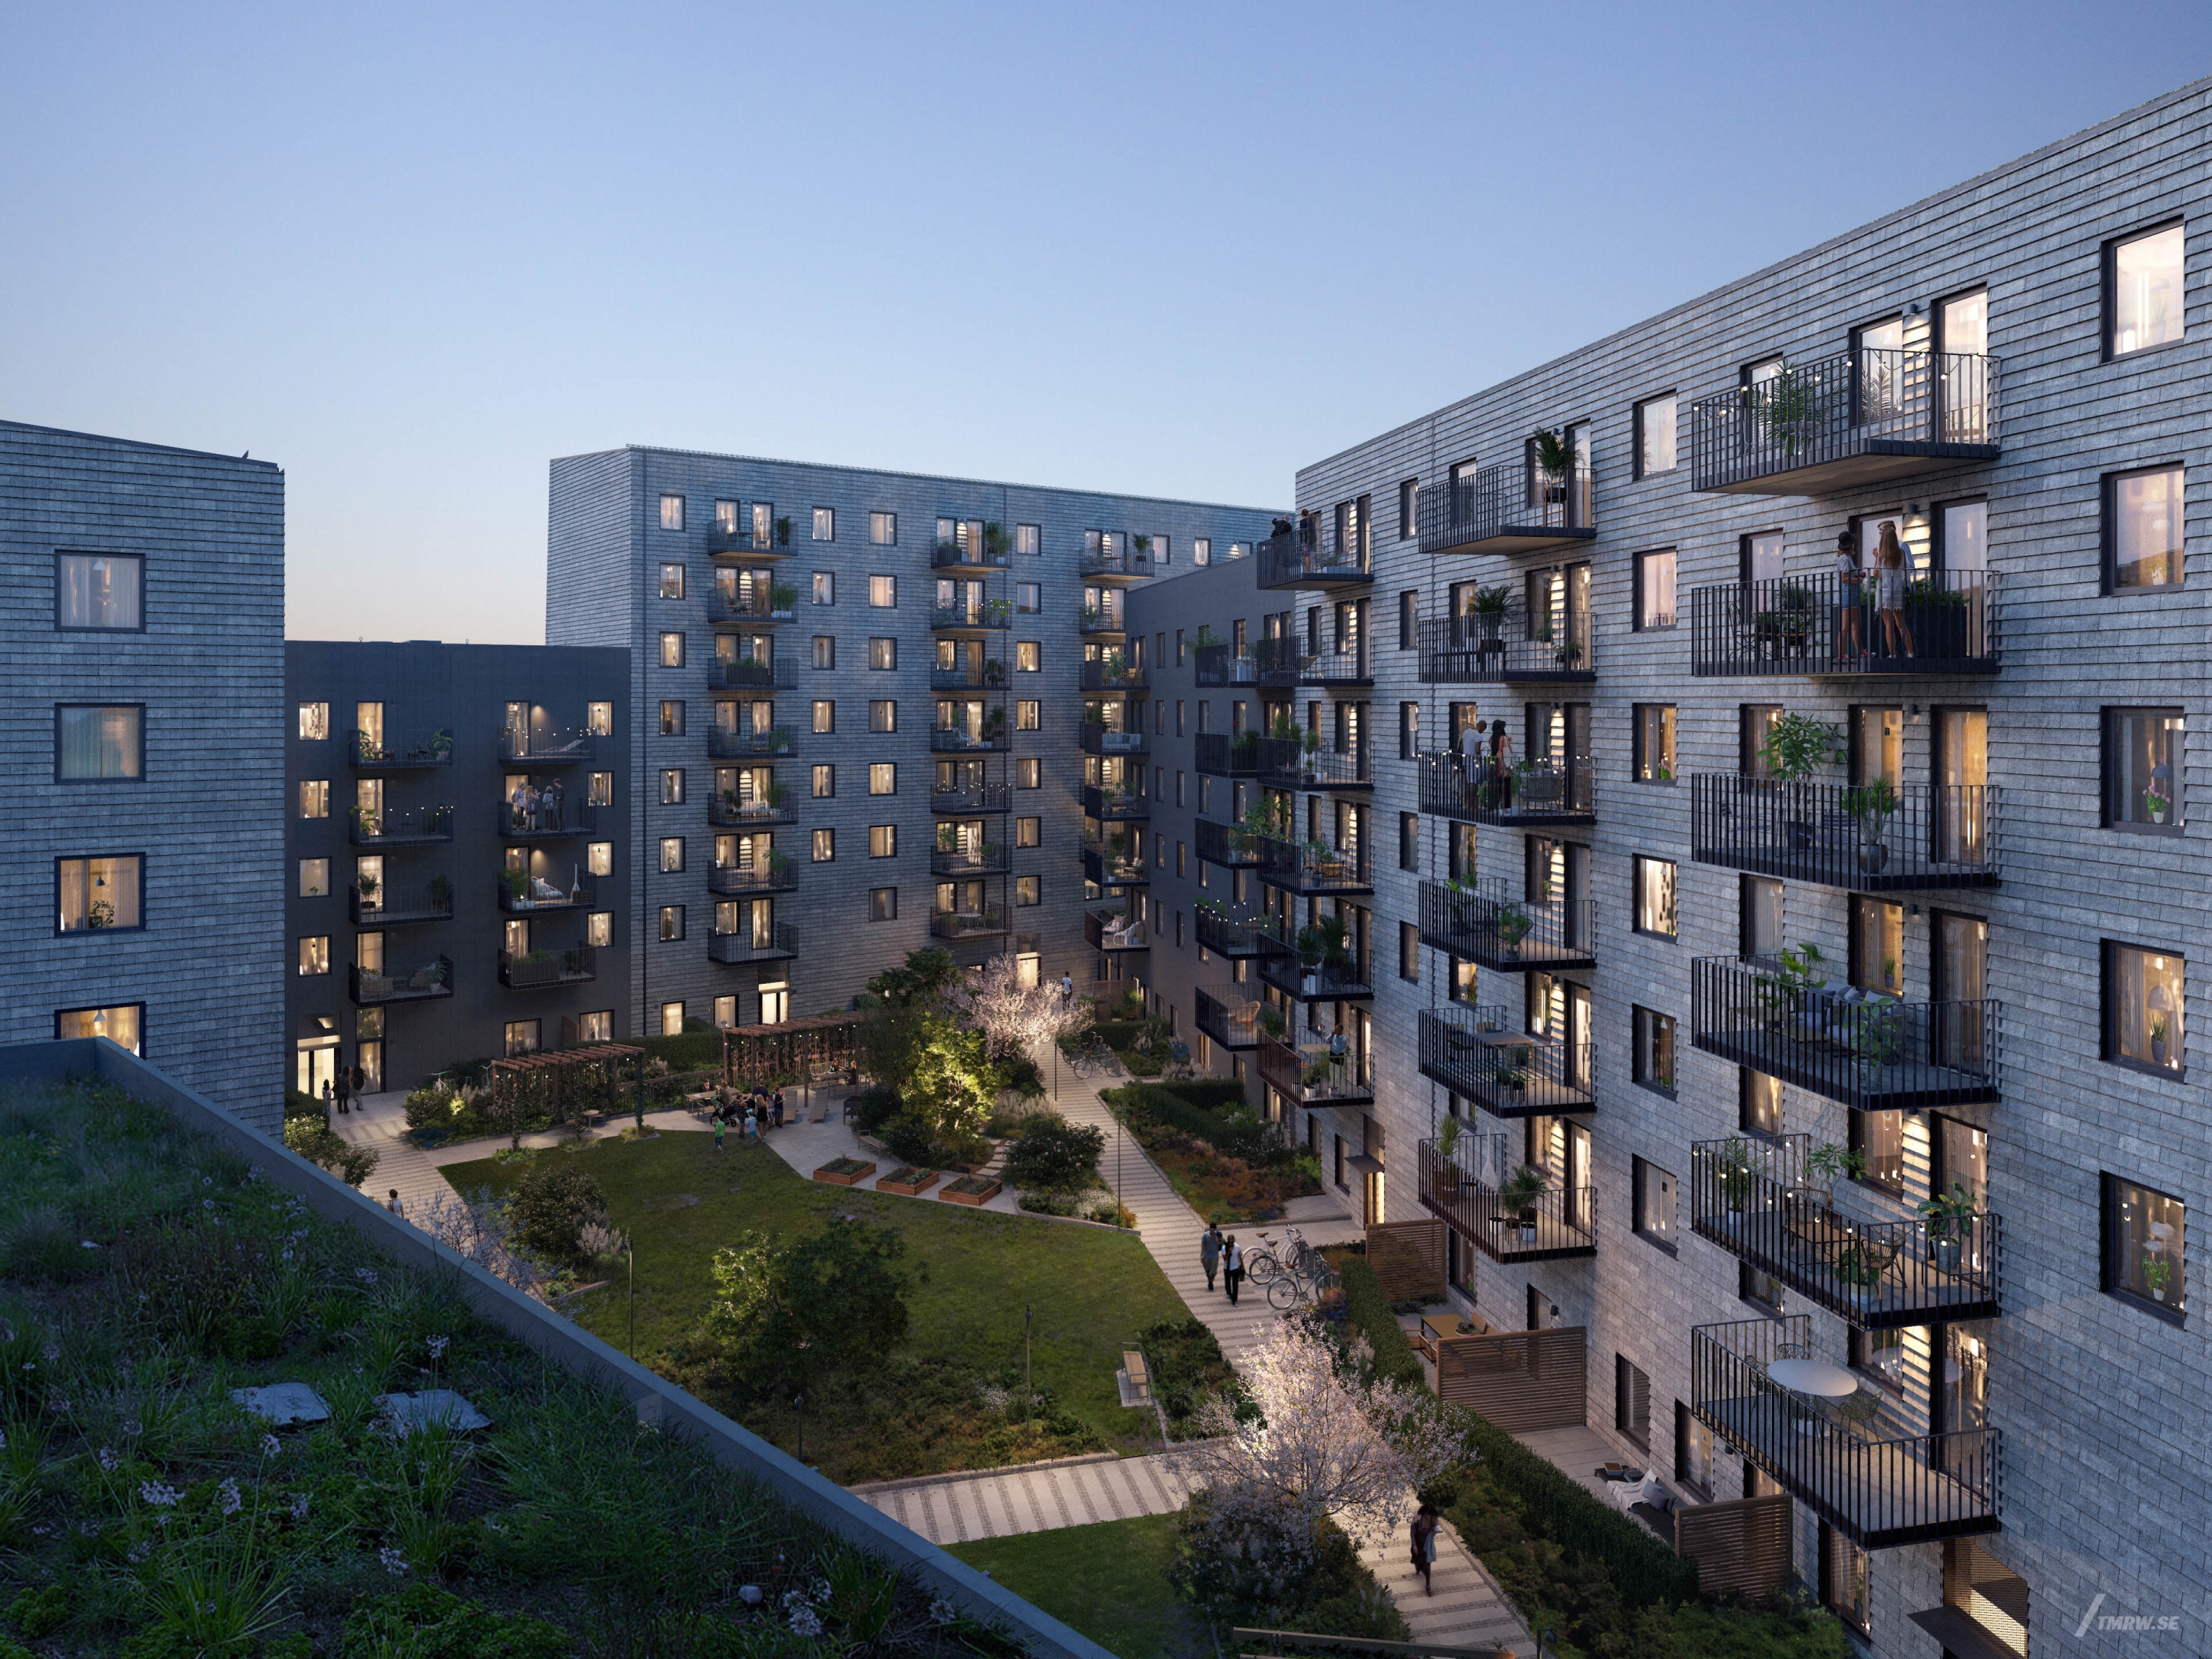 Architectural visualization of Lindholmshamnen for Riksbyggen a apartment complex in evening light from a semi aerial view.